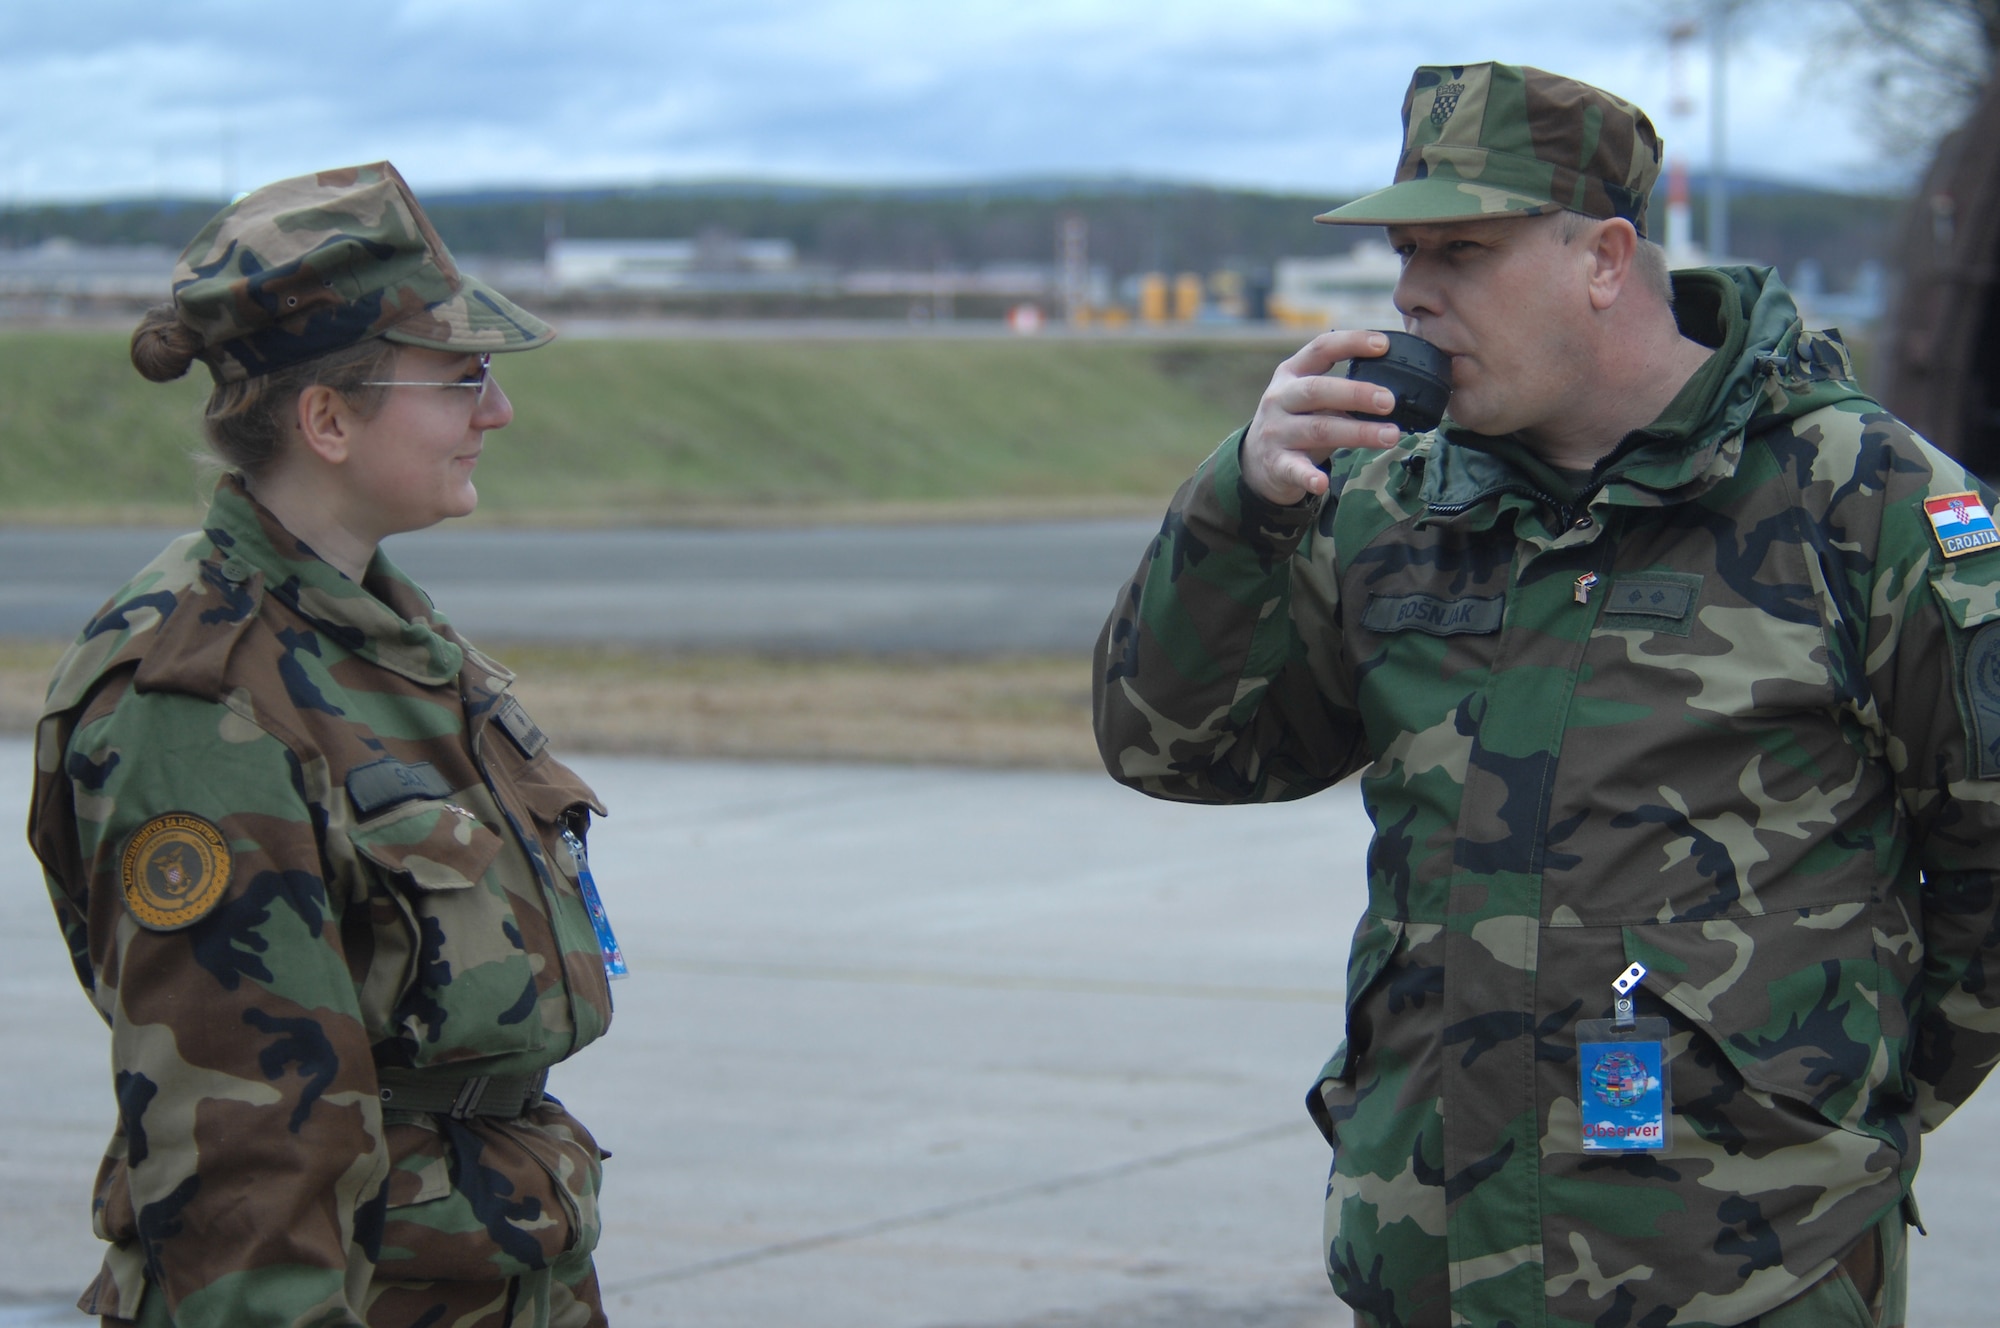 Croatian Army 2nd Lt. Sabina Sacer and Private 1st Class Stanko Bosnjak take a taste of water they have just purified using the H9518-1 reverse osmosis water purification unit. This year’s Silver Flag Exercise hosted here Feb. 21 - 28 allowed USAFE Airmen, Air Force Reserve and members of the Croatian Army for the first time to observe how Airmen prepare to deploy to austere locations. (U.S. Air Force photo by Tech. Sgt. Michael Voss)